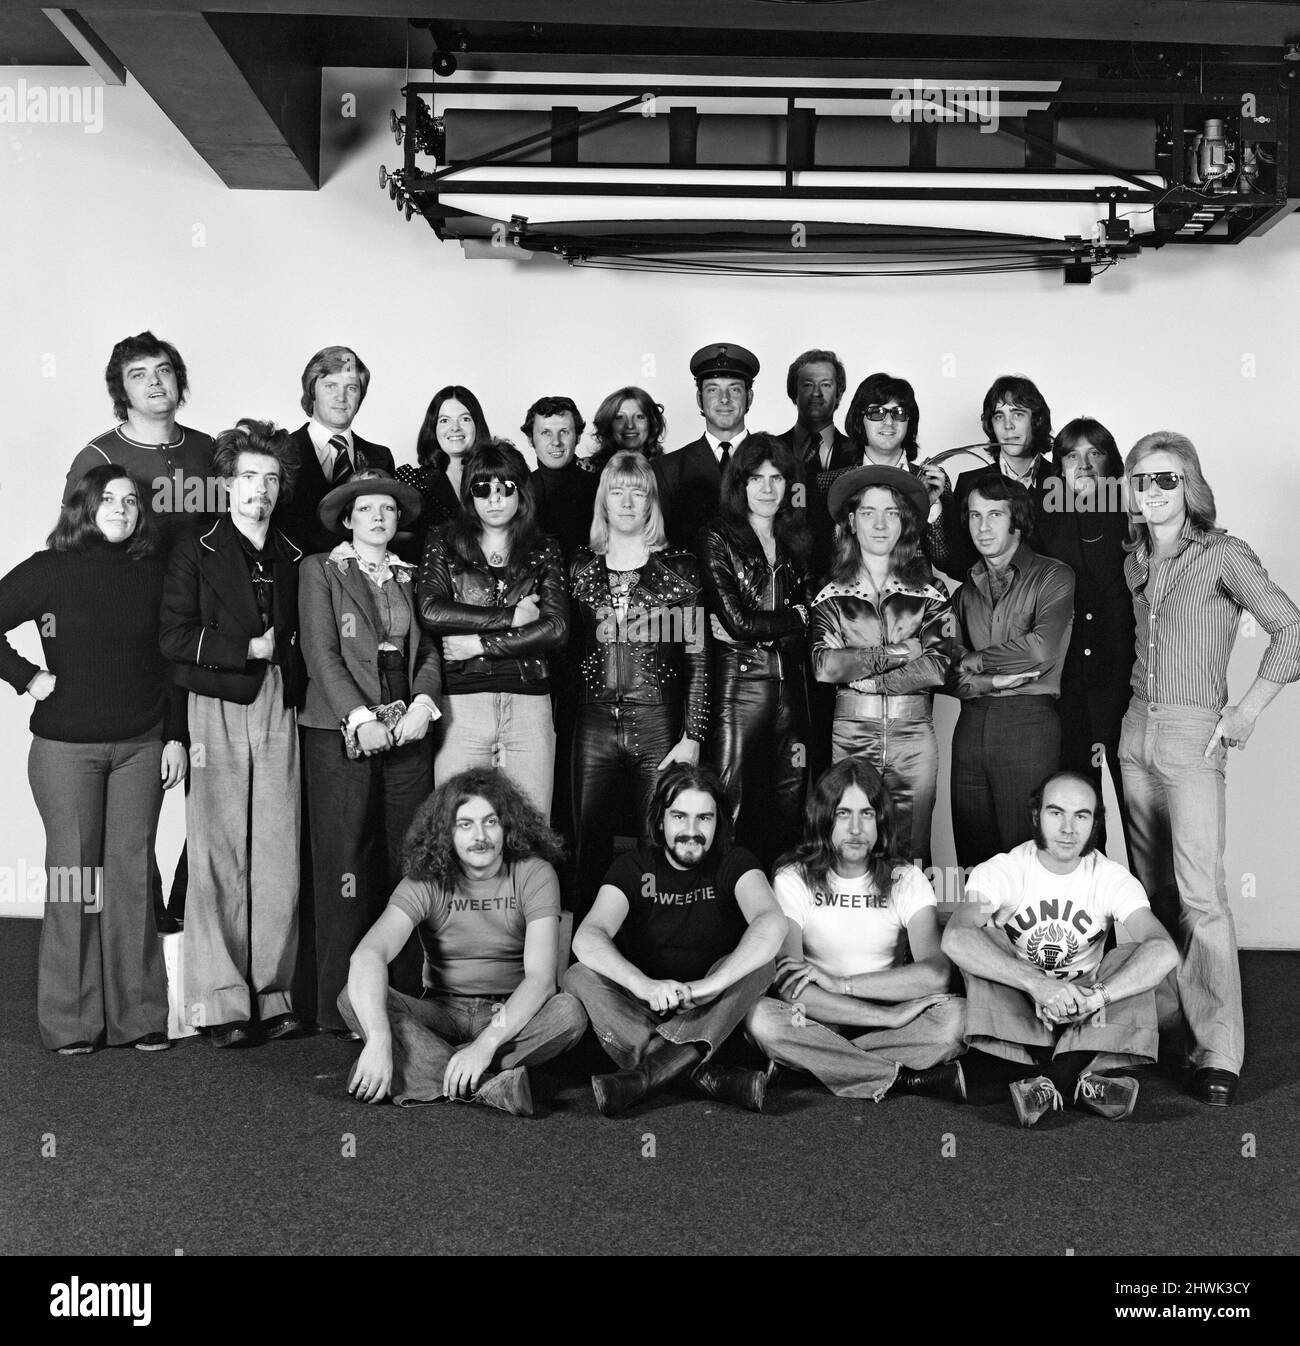 A group of people who put 'The Sweet' on the road. The four members of the band, Andy Scott, Brian Connelly, Mick Tucker and Steve Priest, are in the centre of picture. Also pictured is fan club secretary Christine Wood (back row, third from left). Front row includes roadies Terry Price, John Wayte, Ian Martin and sound mixer Jan Frewer. 8th October 1973. Stock Photo